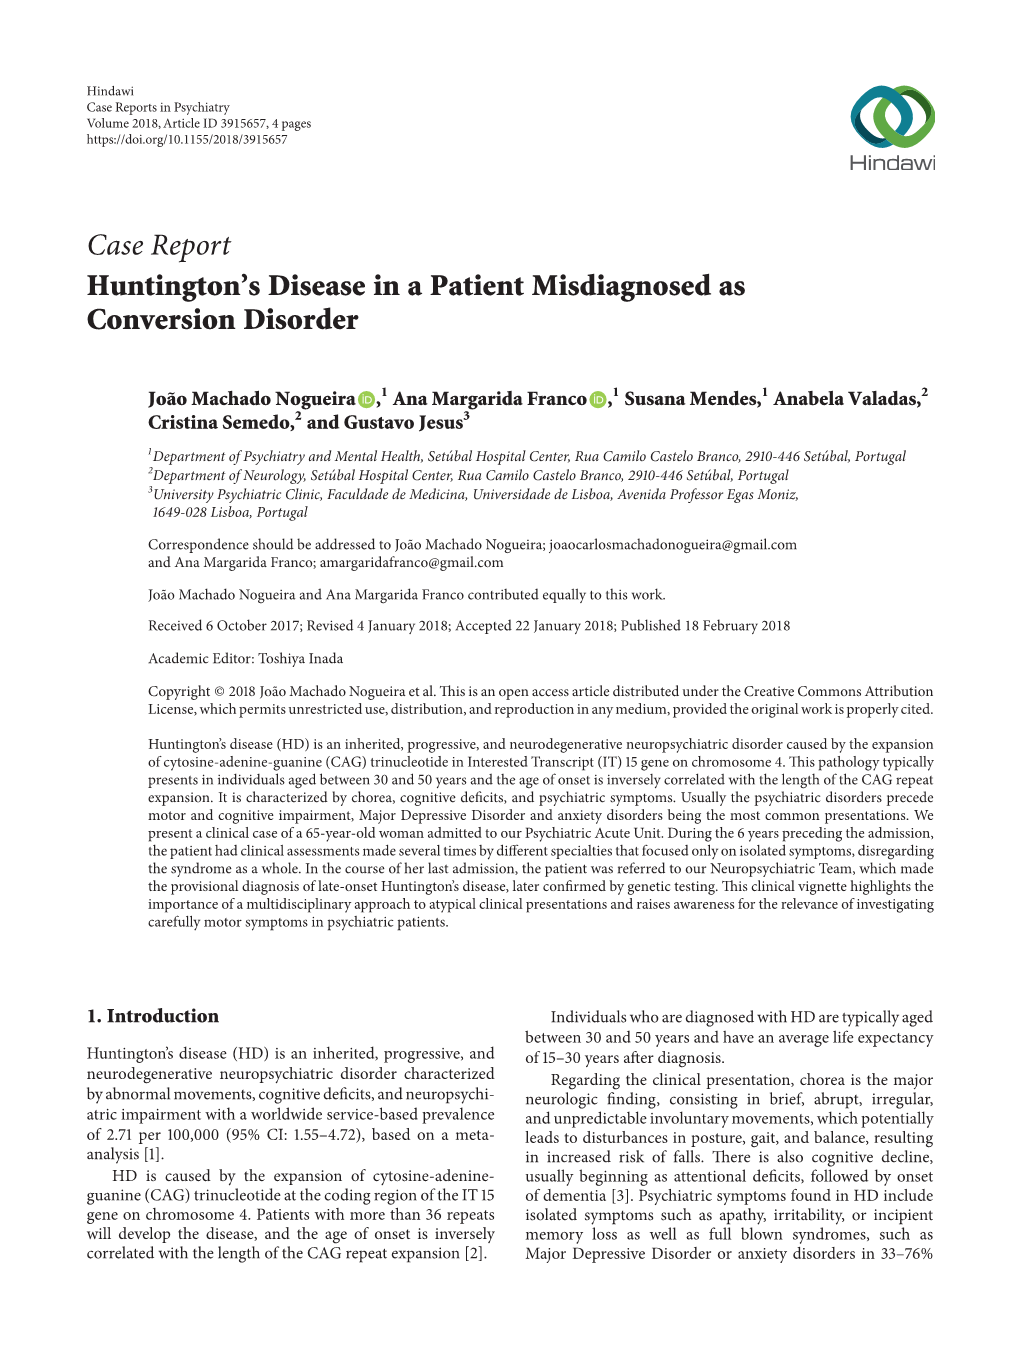 Case Report Huntington's Disease in a Patient Misdiagnosed As